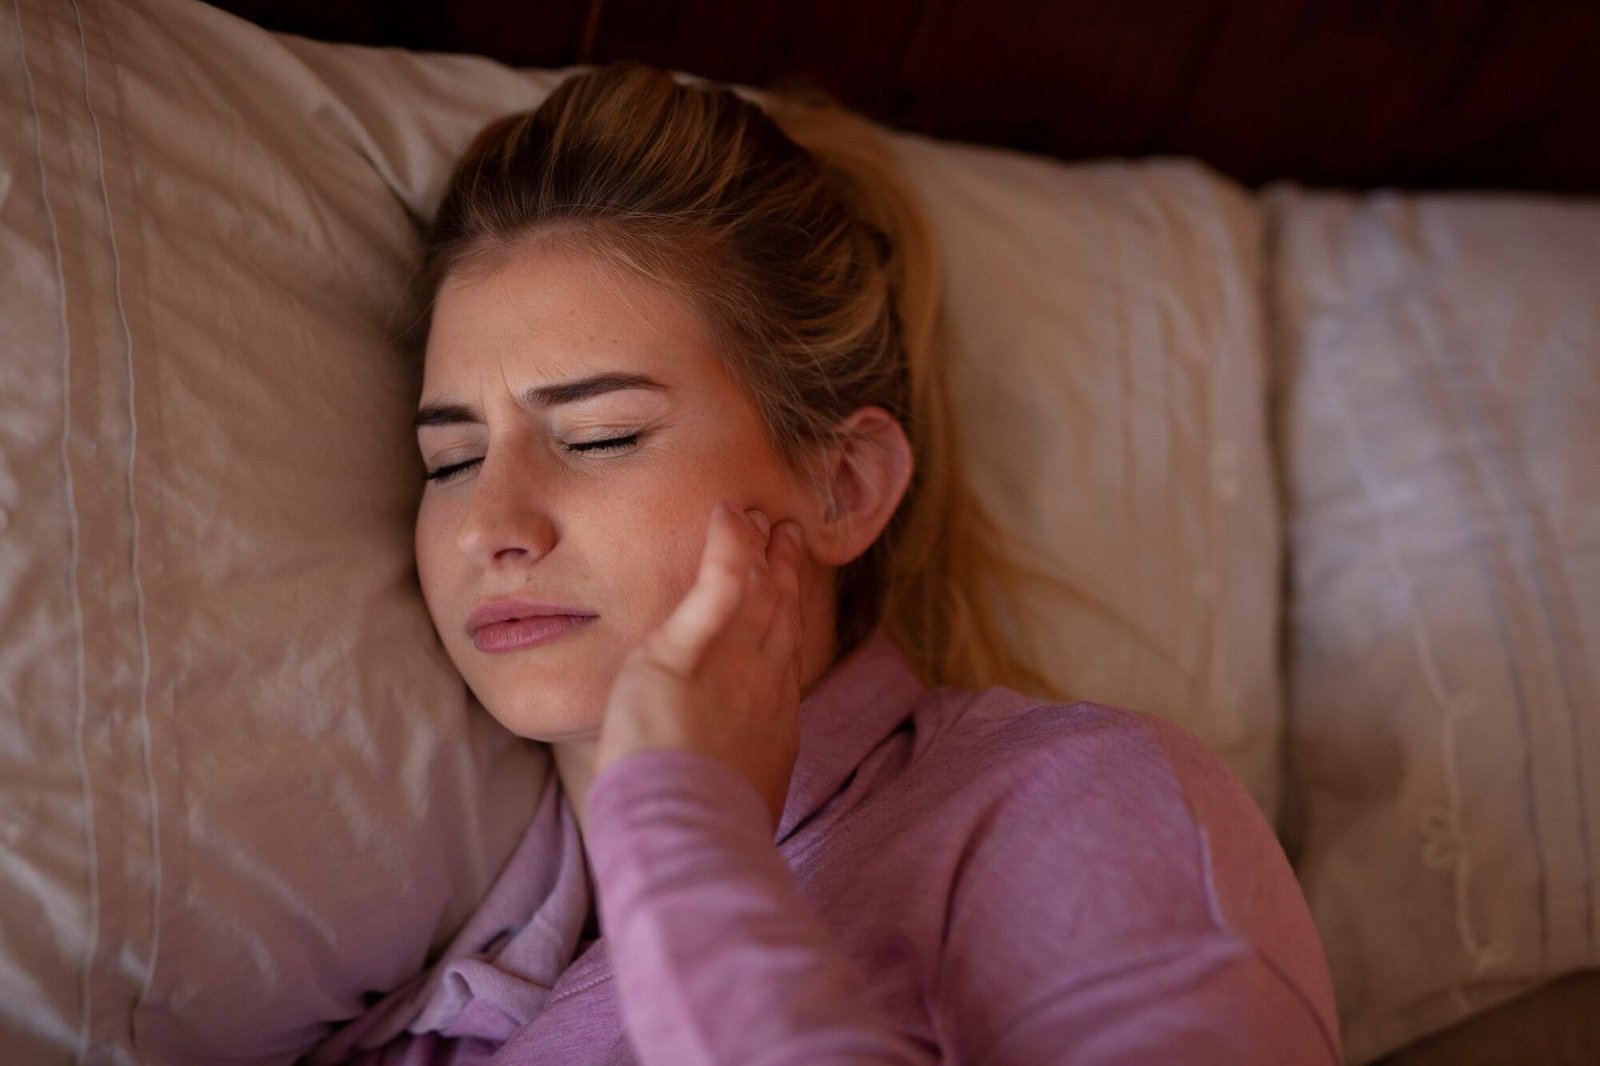 Aches and sleep anxiety caused by TMJ symptoms